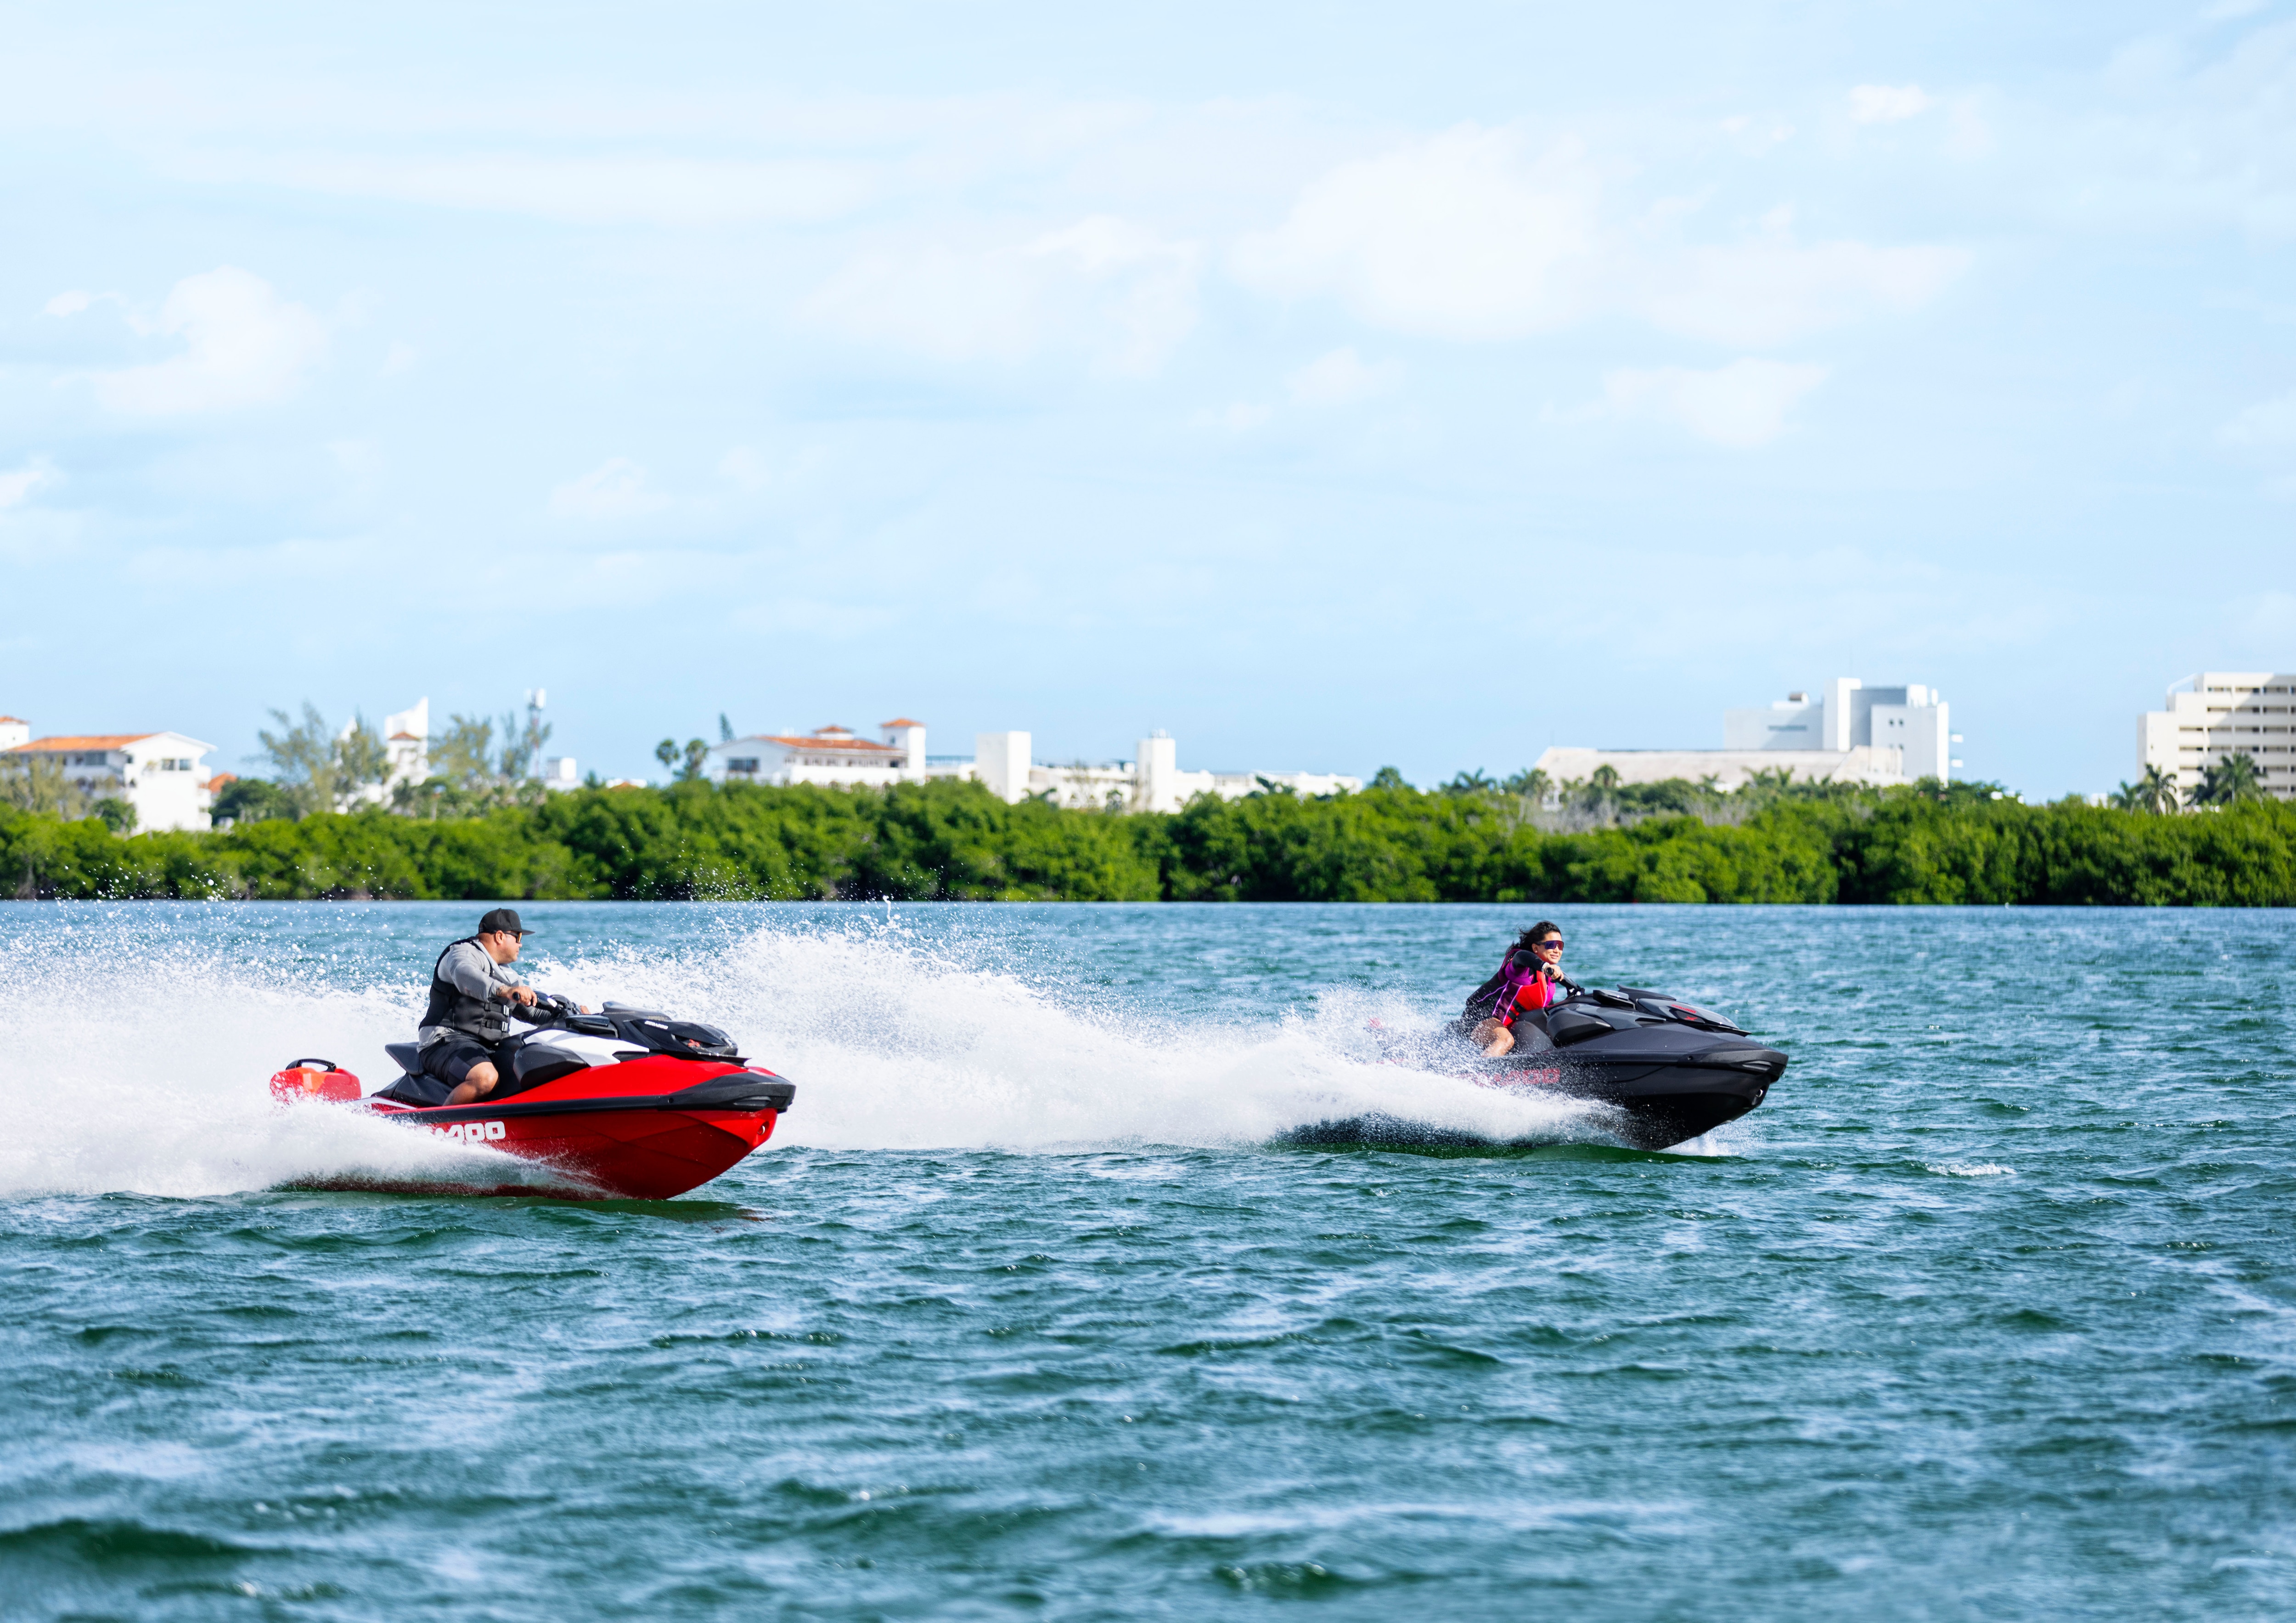 Two Sea-Doo personal watercrafts riding side by side